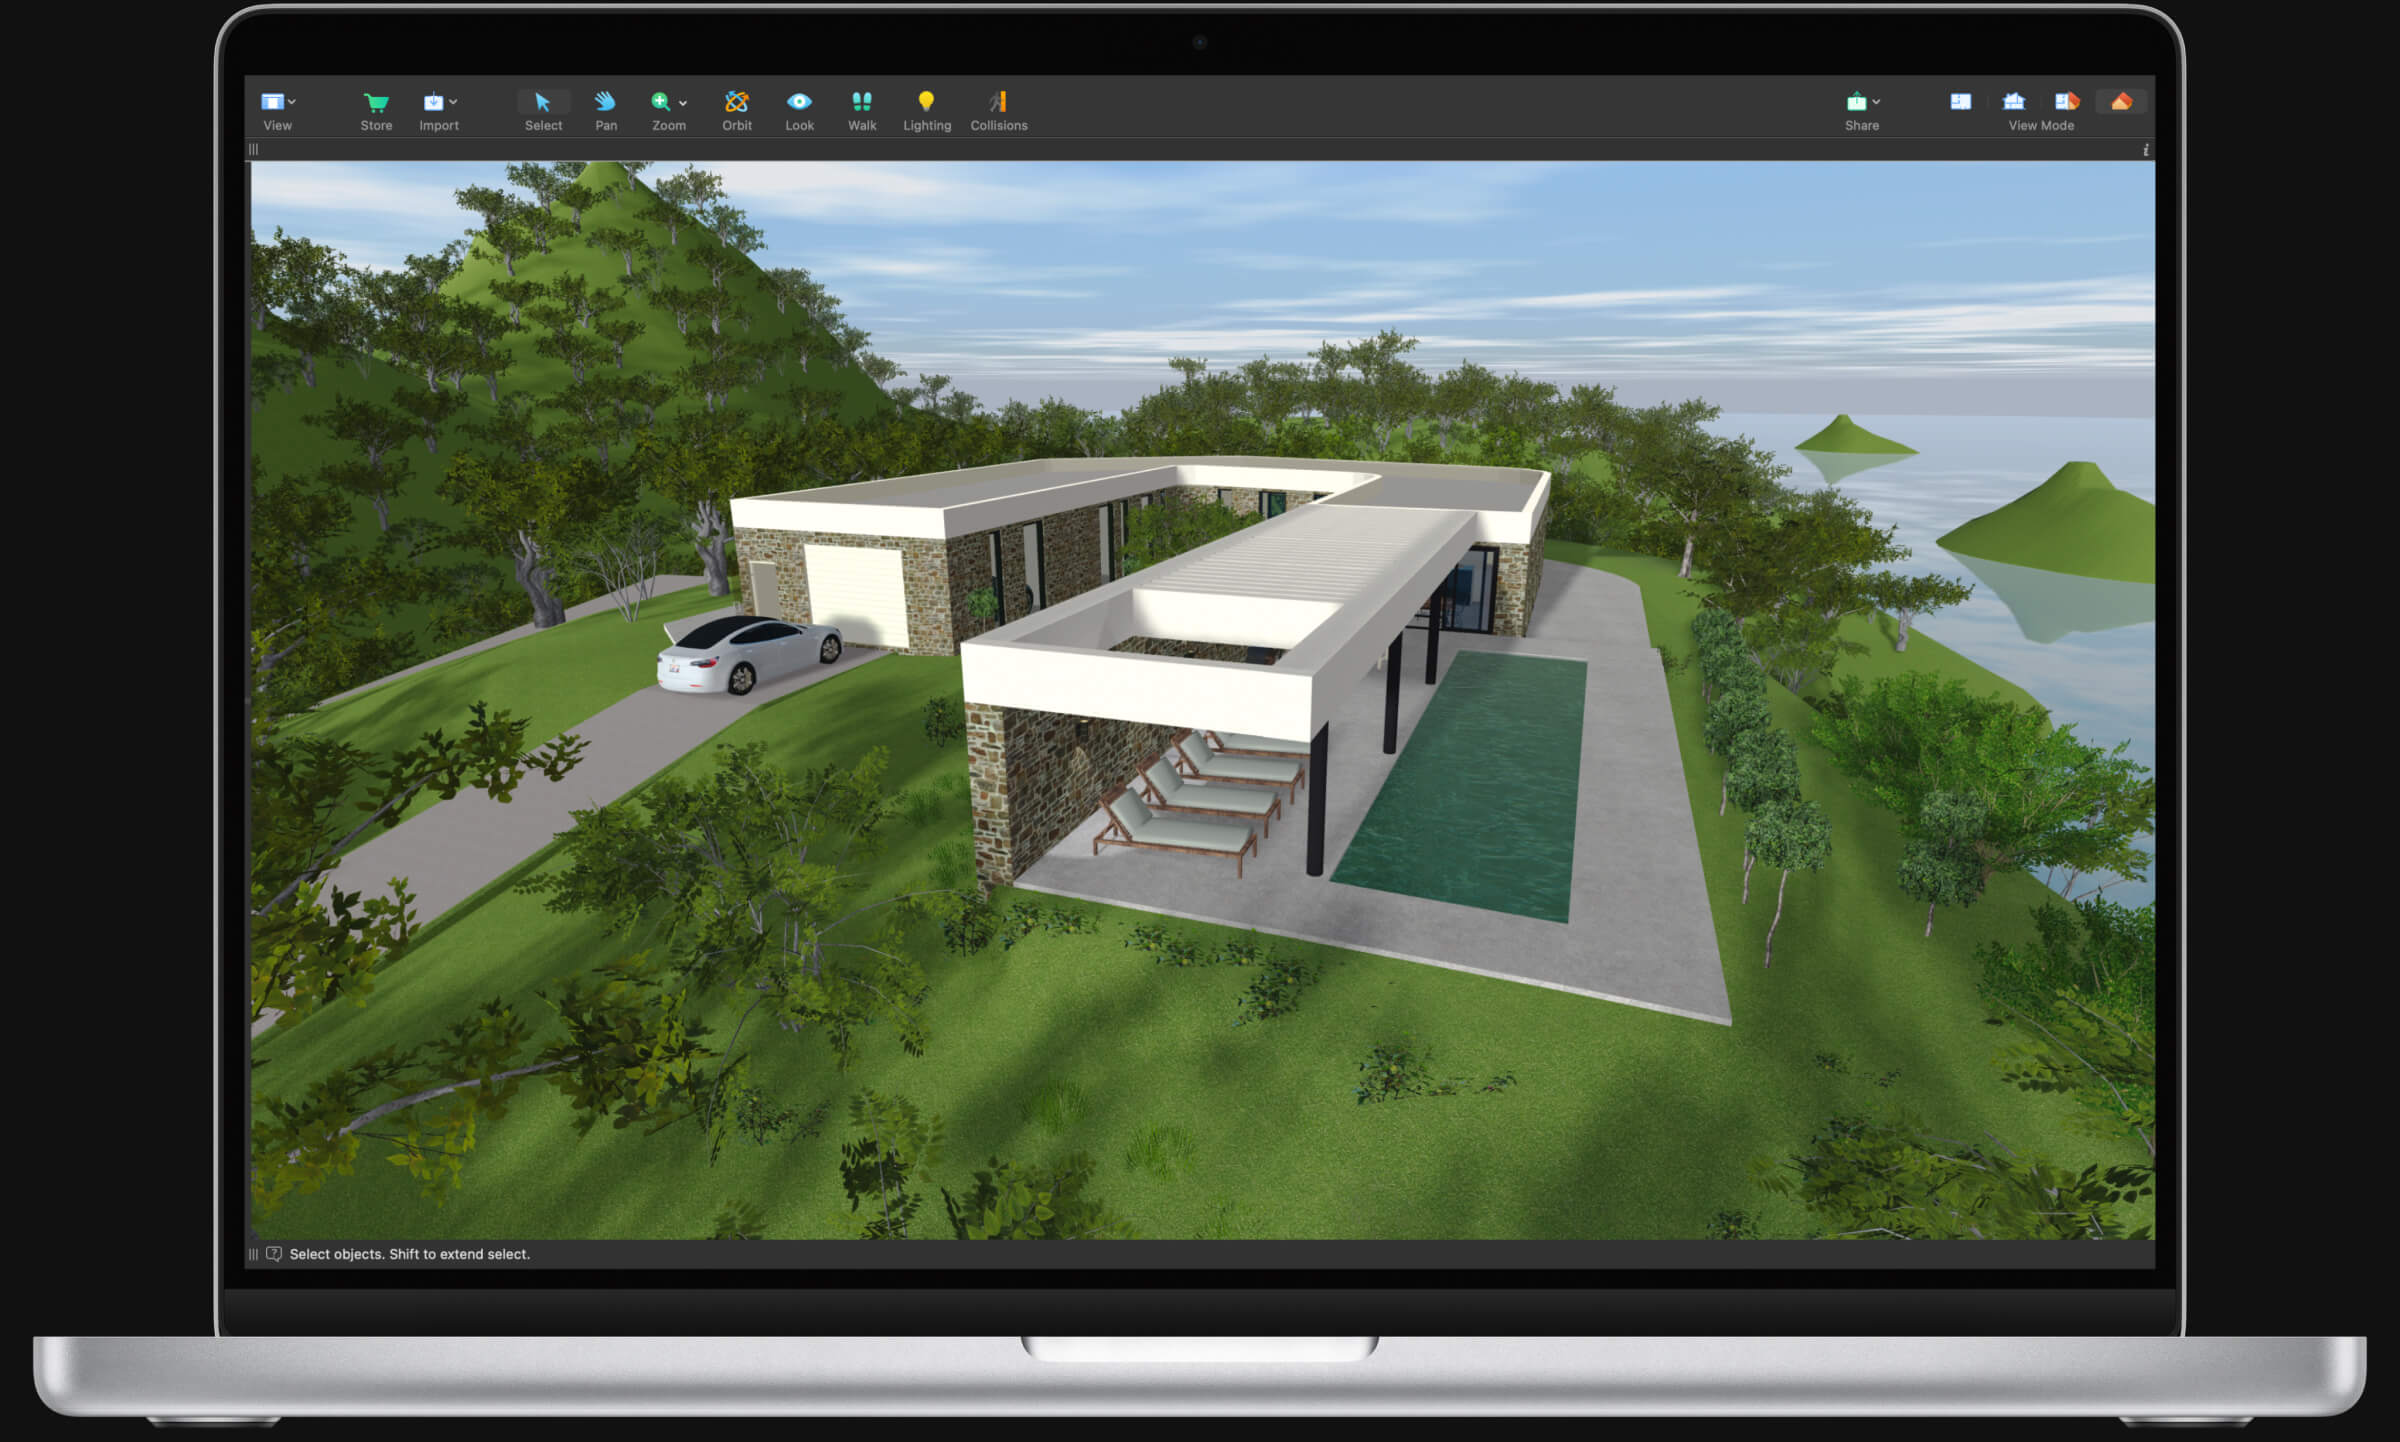 A project with complicated terrain made in Live Home 3D landscape planner.